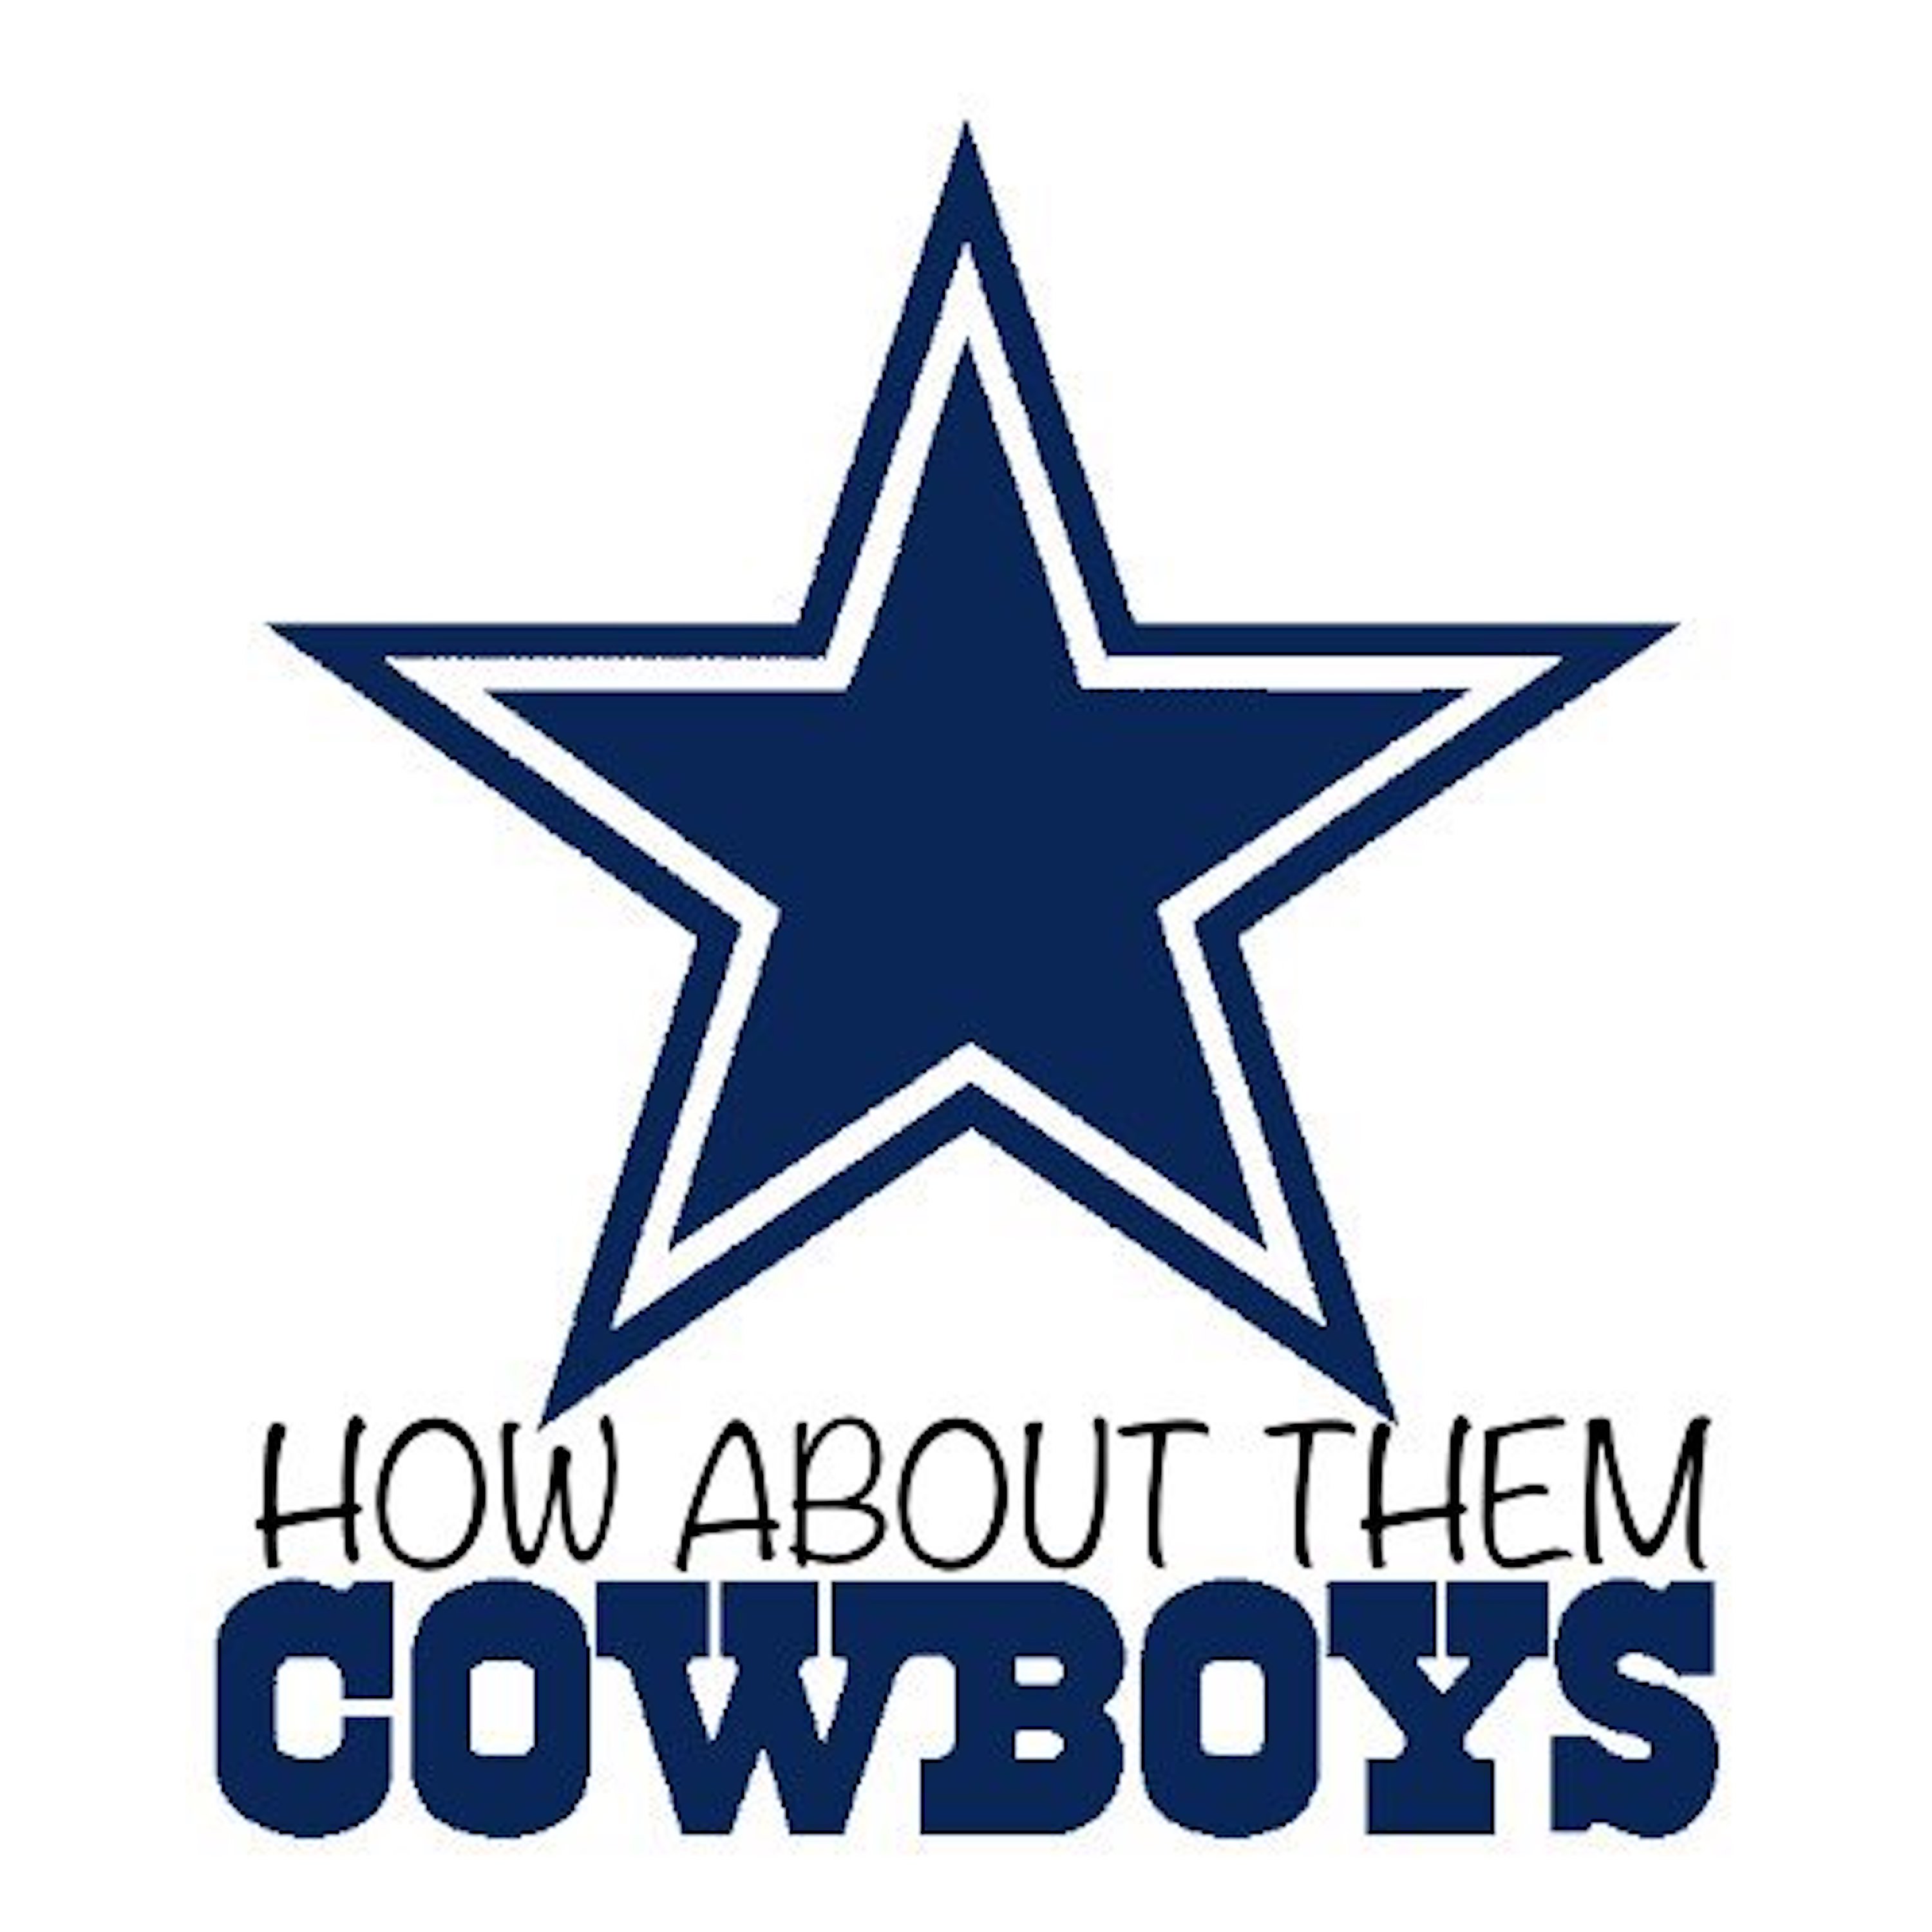 Post Thanksgiving 2017 – How About Them Cowboys